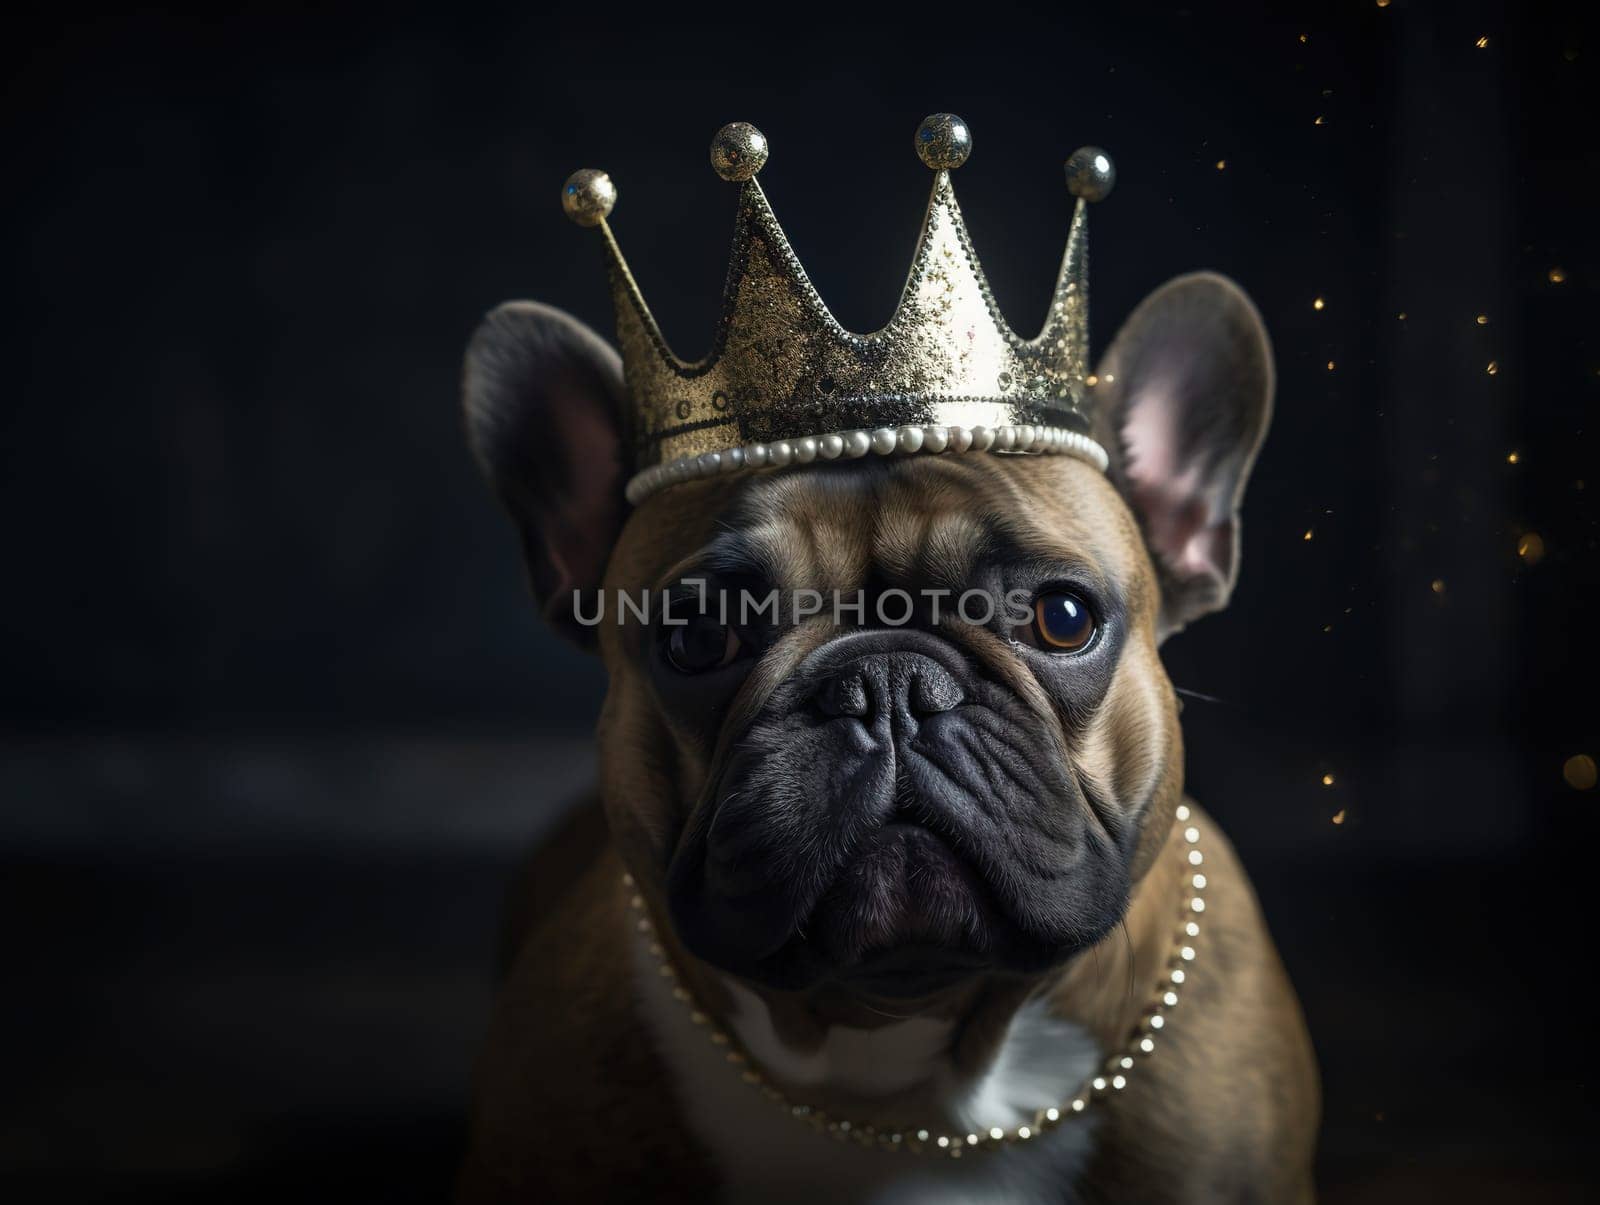 Dog In Carnival Crown Sits On Blurred Background Of Living Room